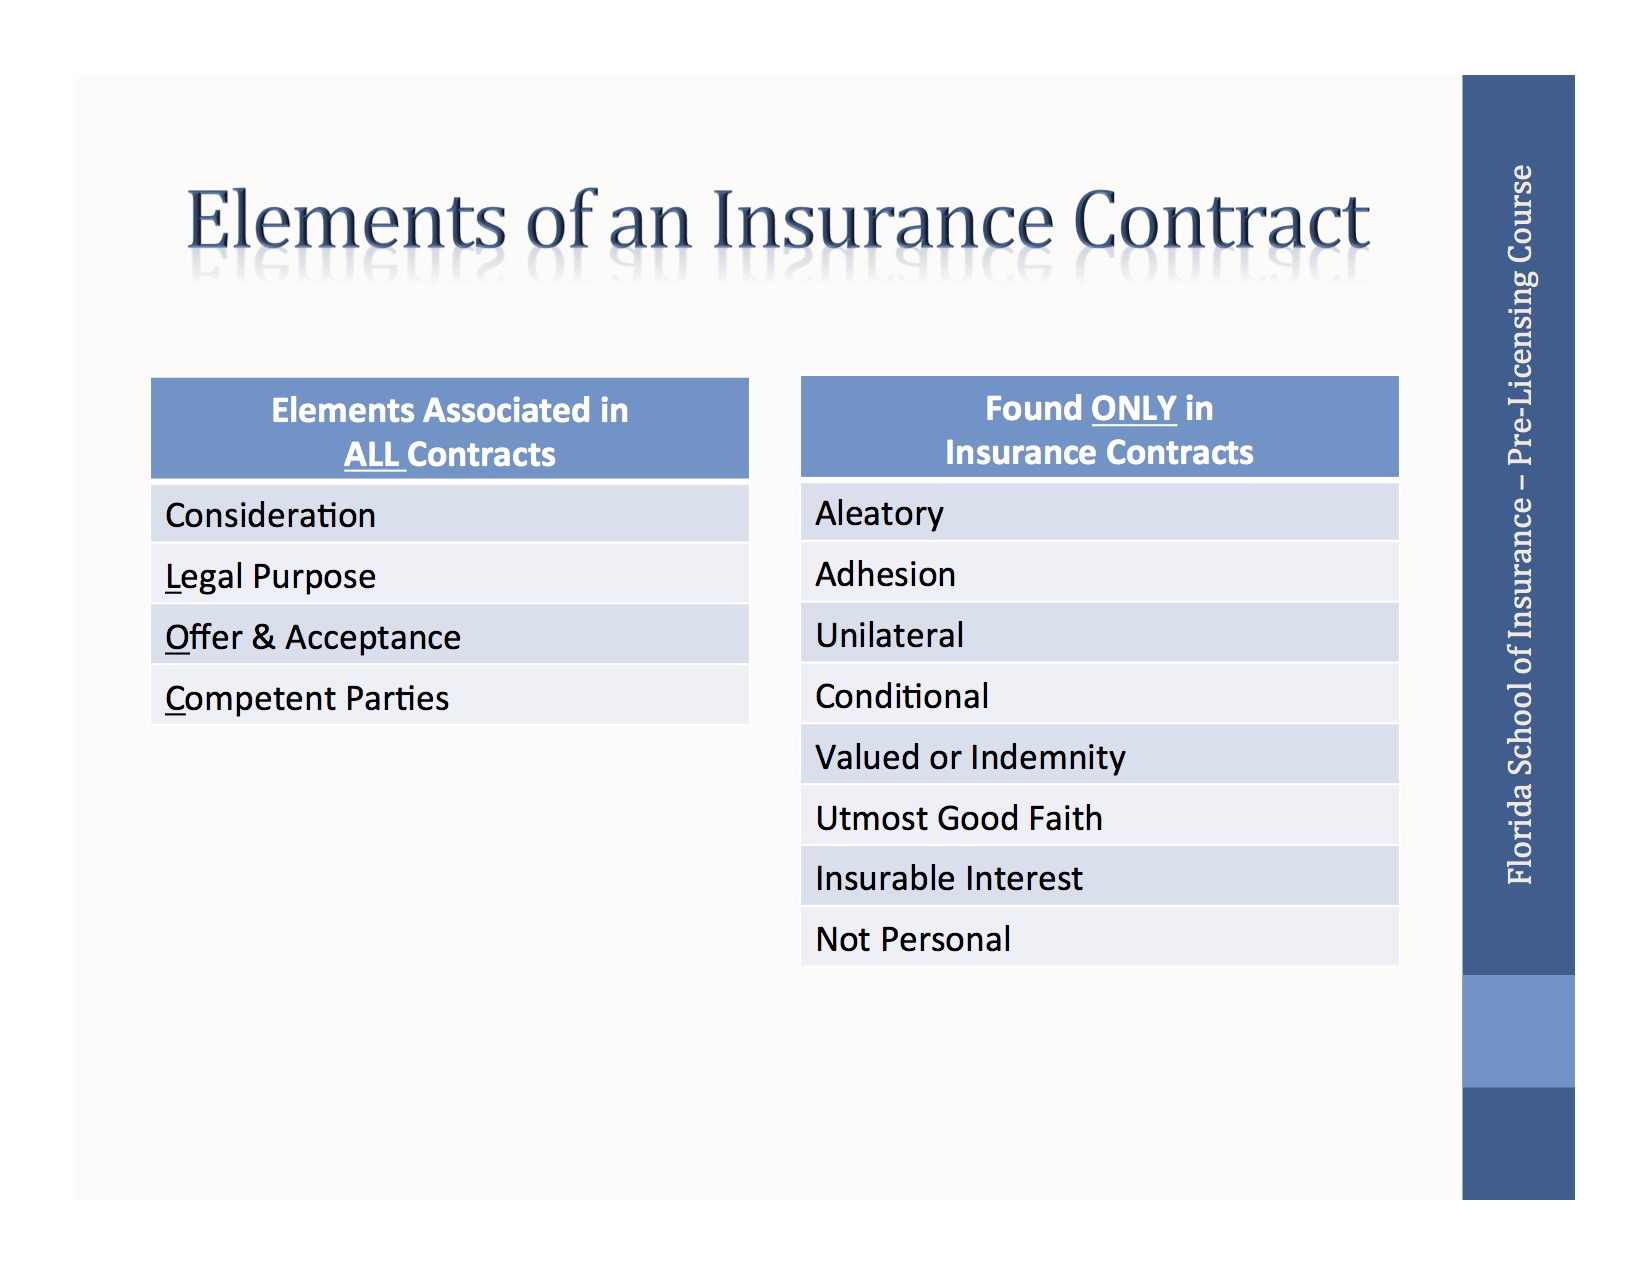 assignment of insurance contract meaning